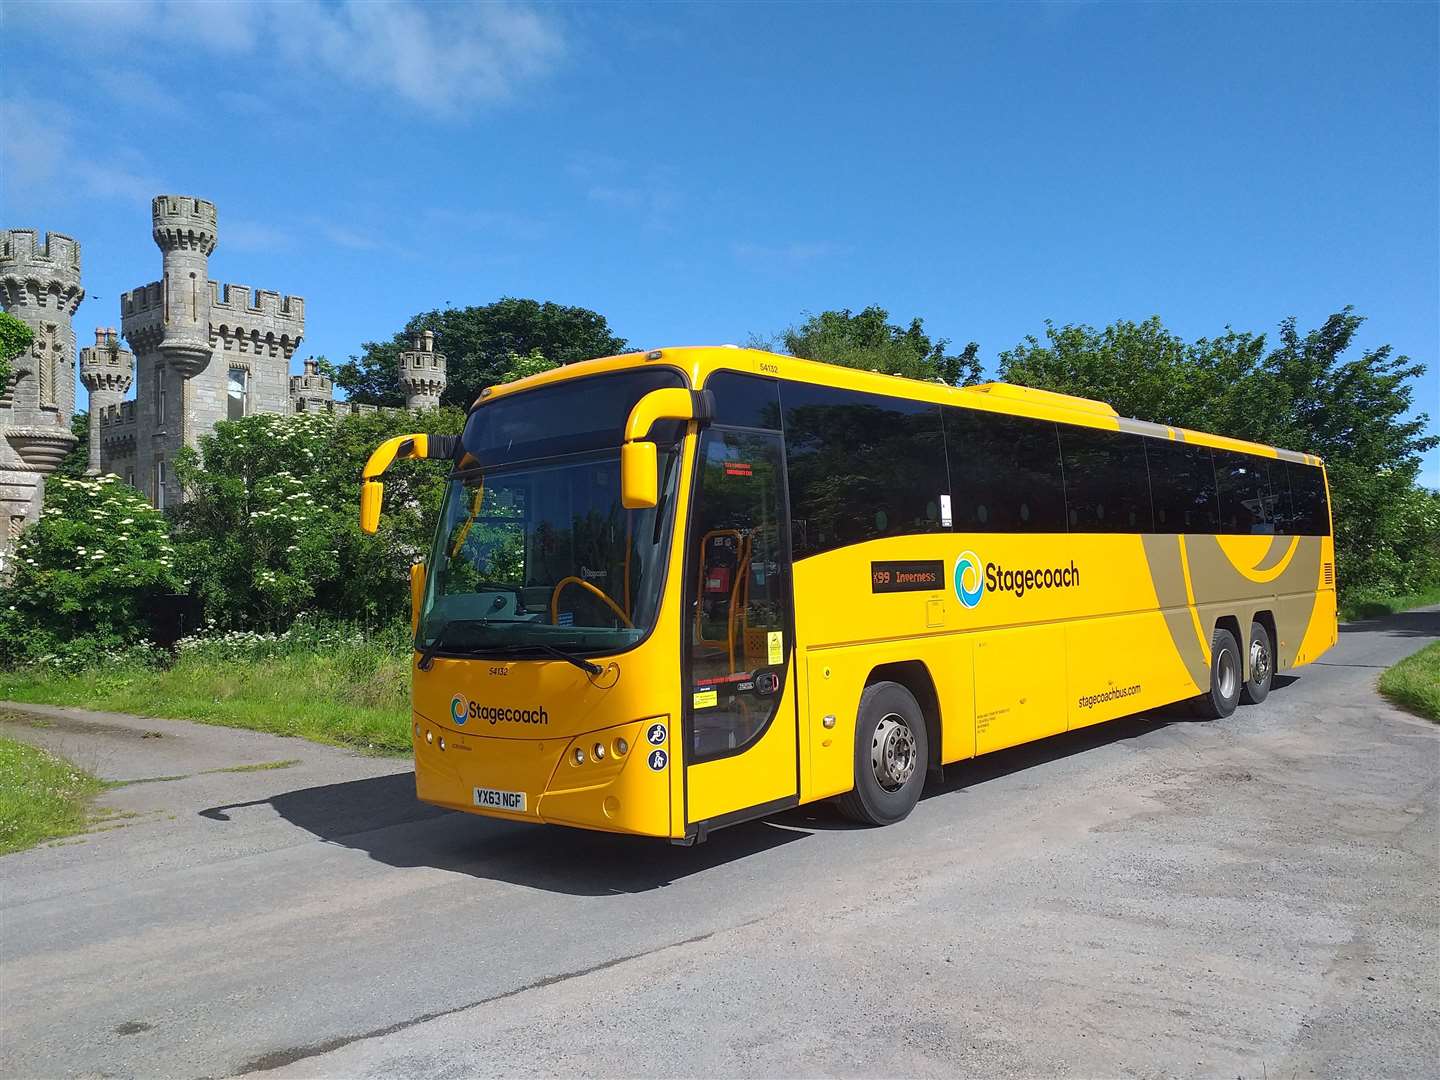 The new type of coach now running on Stagecoach's service between Caithness and Inverness.